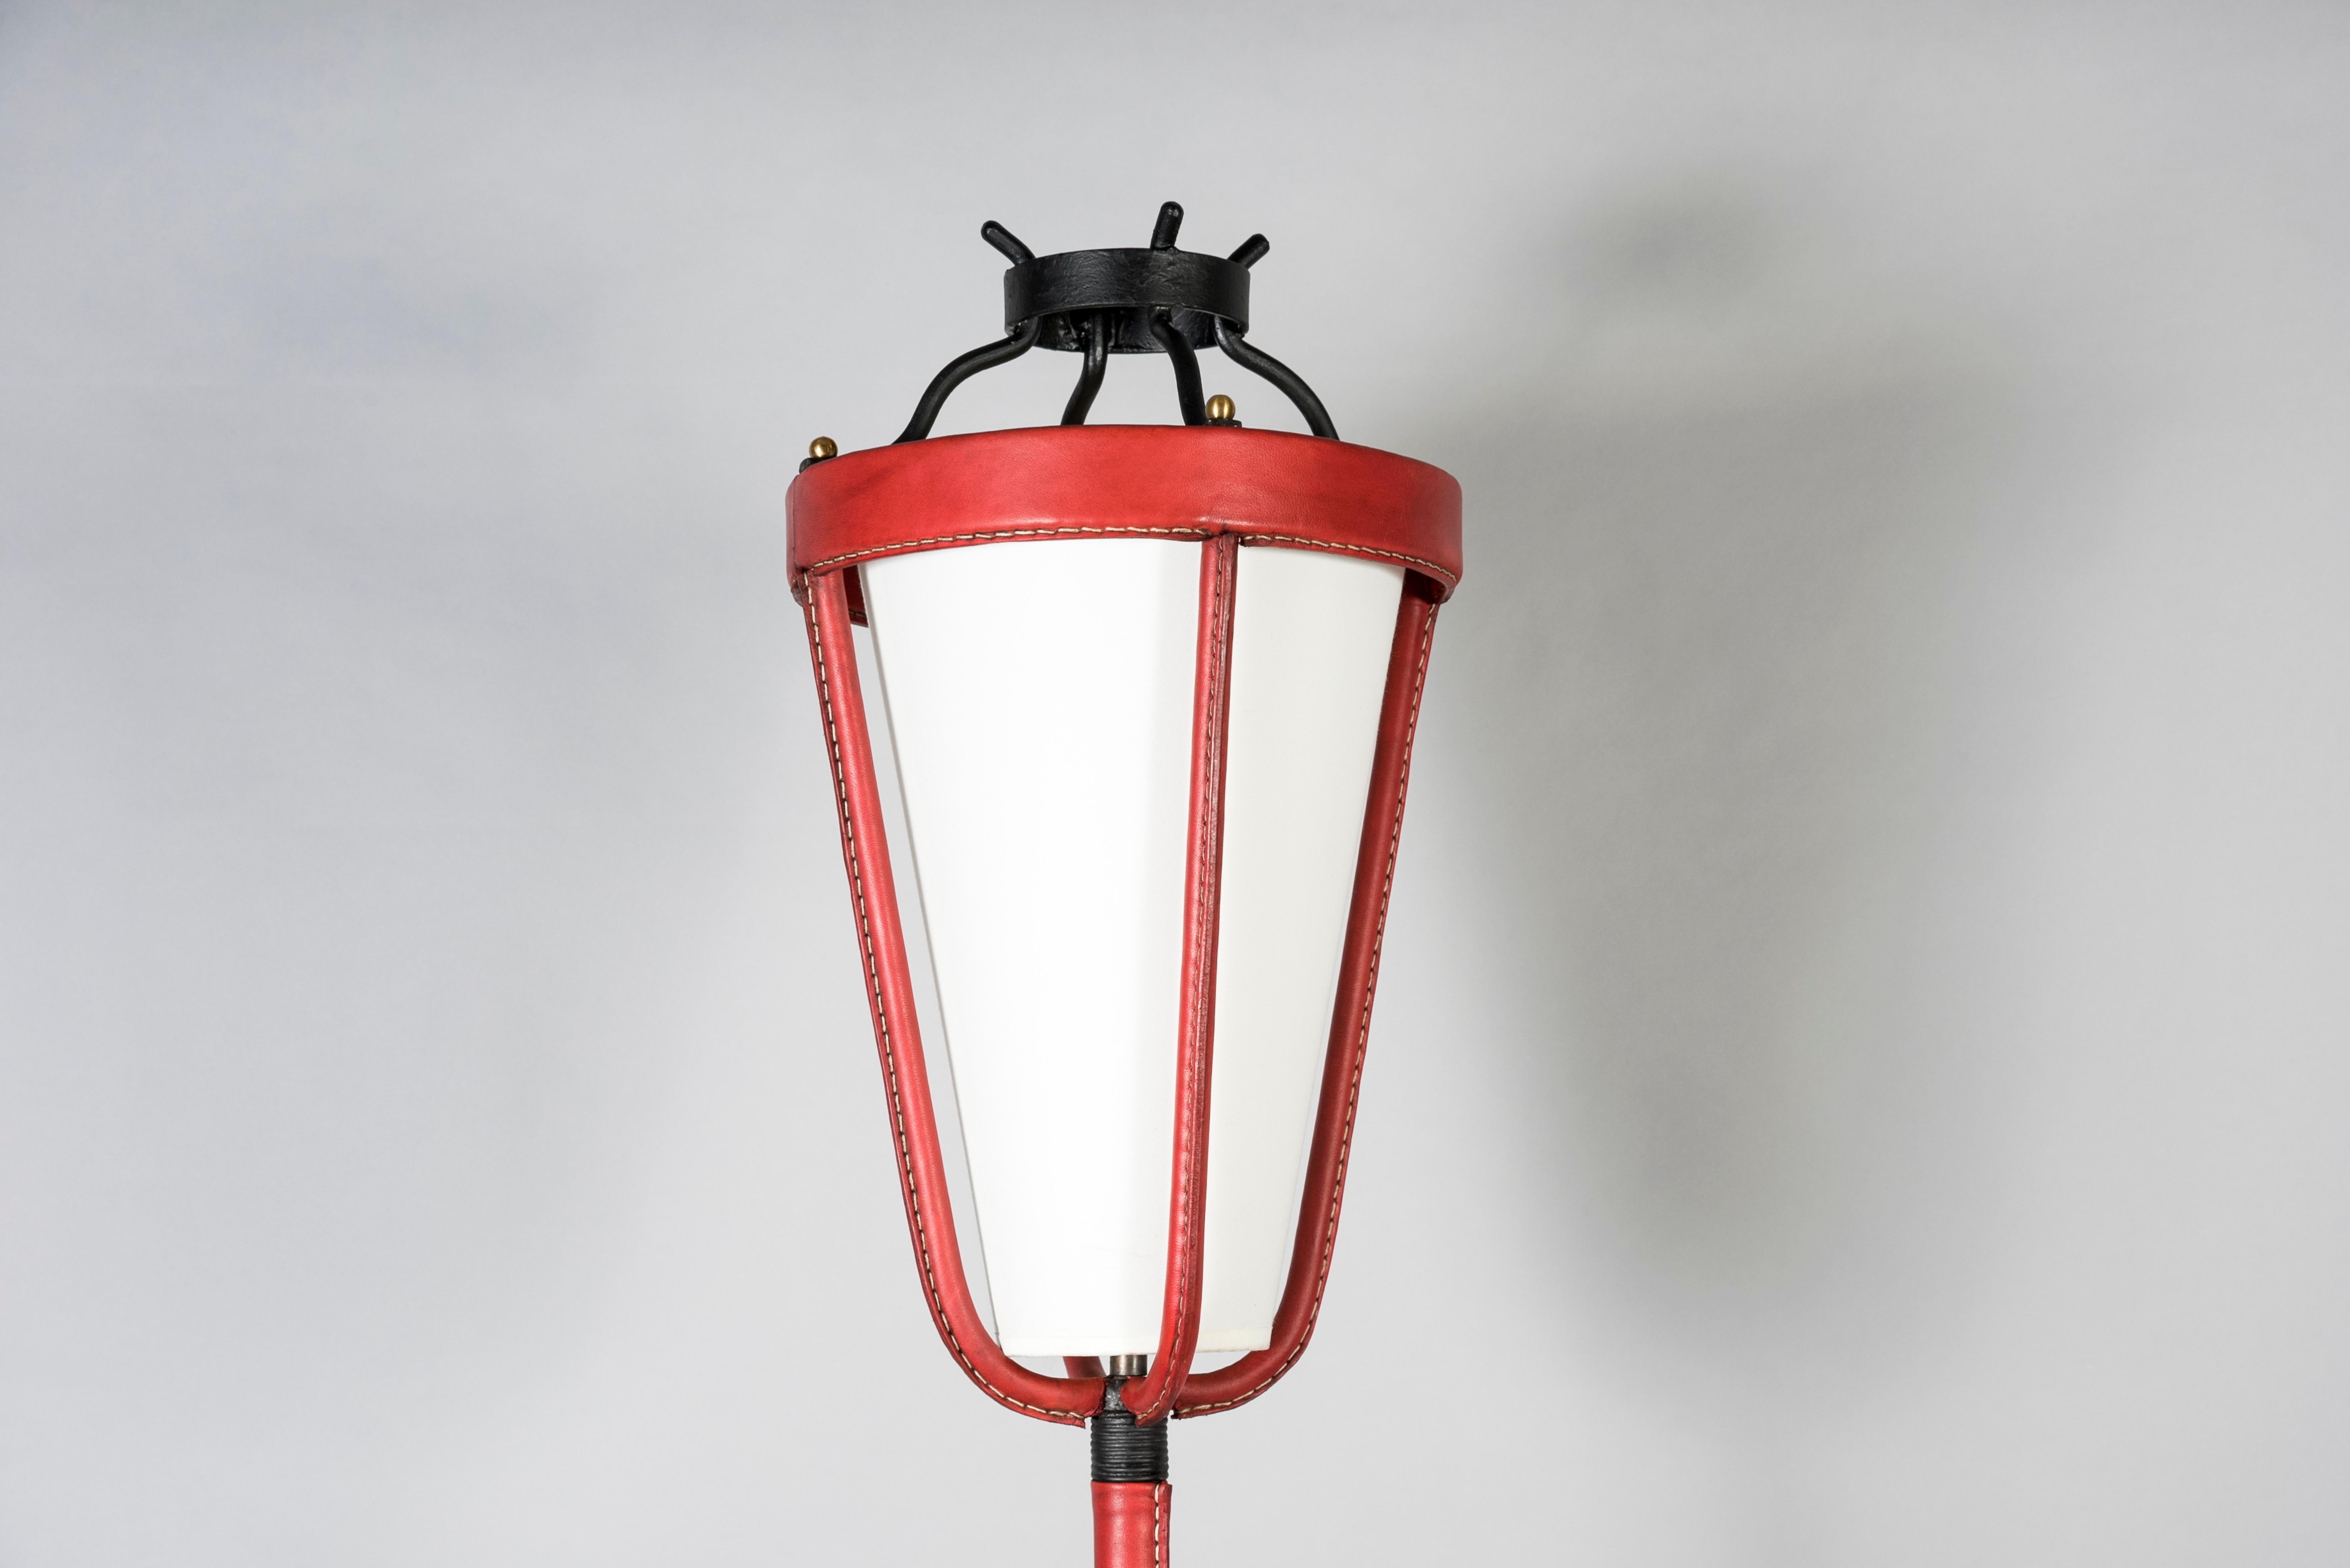 1950's Stitched leather floor lamp designed by Jacques Adnet
Red color, Great condition
France.